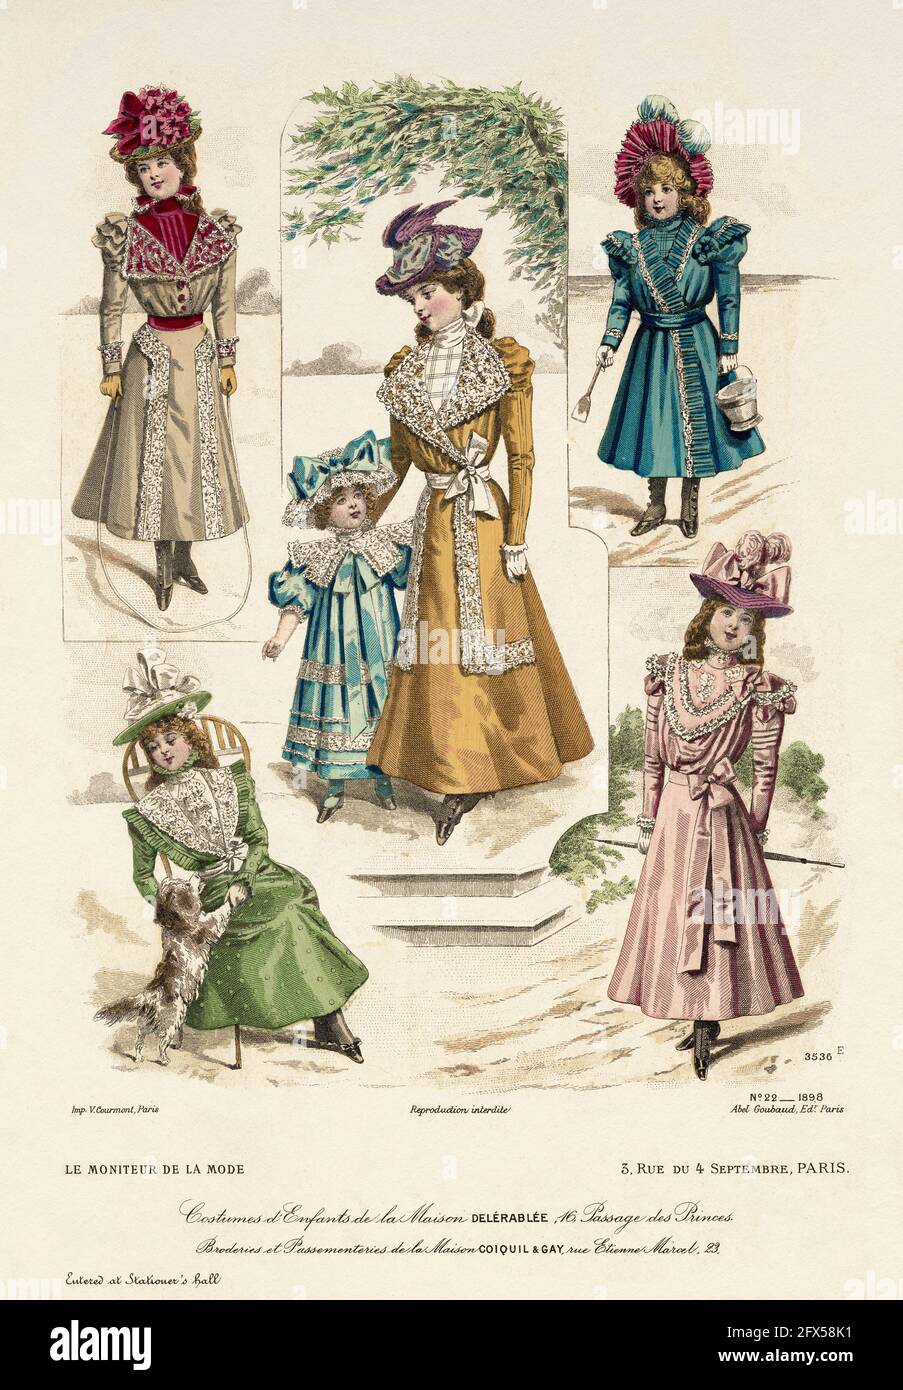 Children's costumes from Maison Delerablee & Embroidery and trimmings from Maison Coiquil & Gay. The latest fashions designed and tailored for the dressmaker and seamstress of Moniteur de la mode, Paris 1898. France, Europe. Old color lithograph from the late XIX century Stock Photo